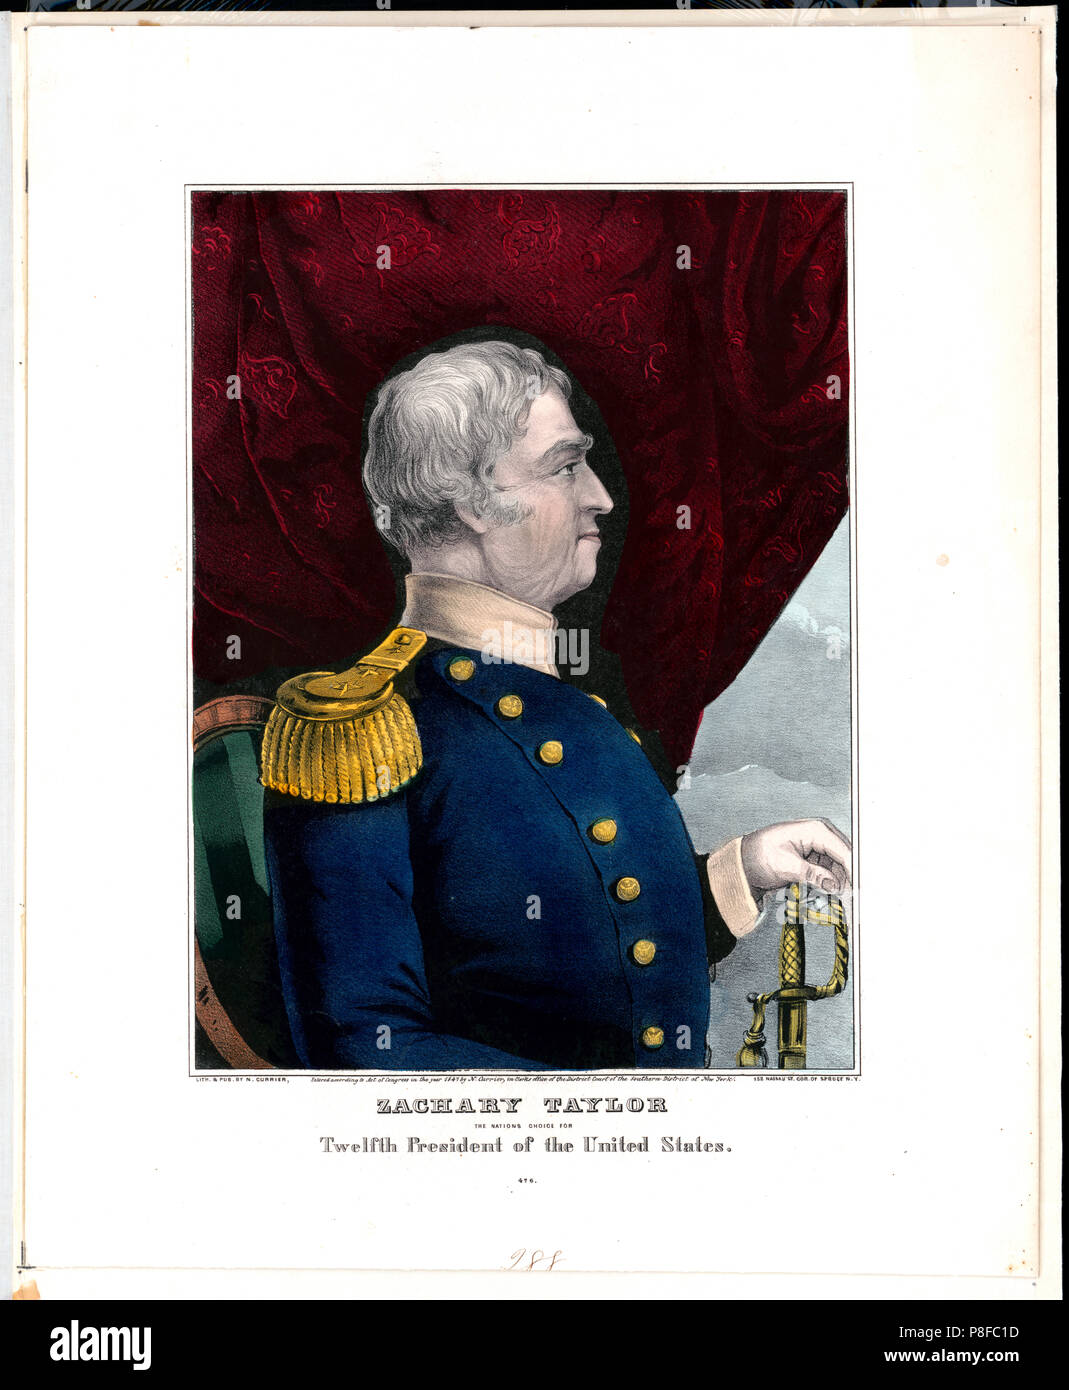 Zachary Taylor the nation's choice for twelfth president of the United States Stock Photo